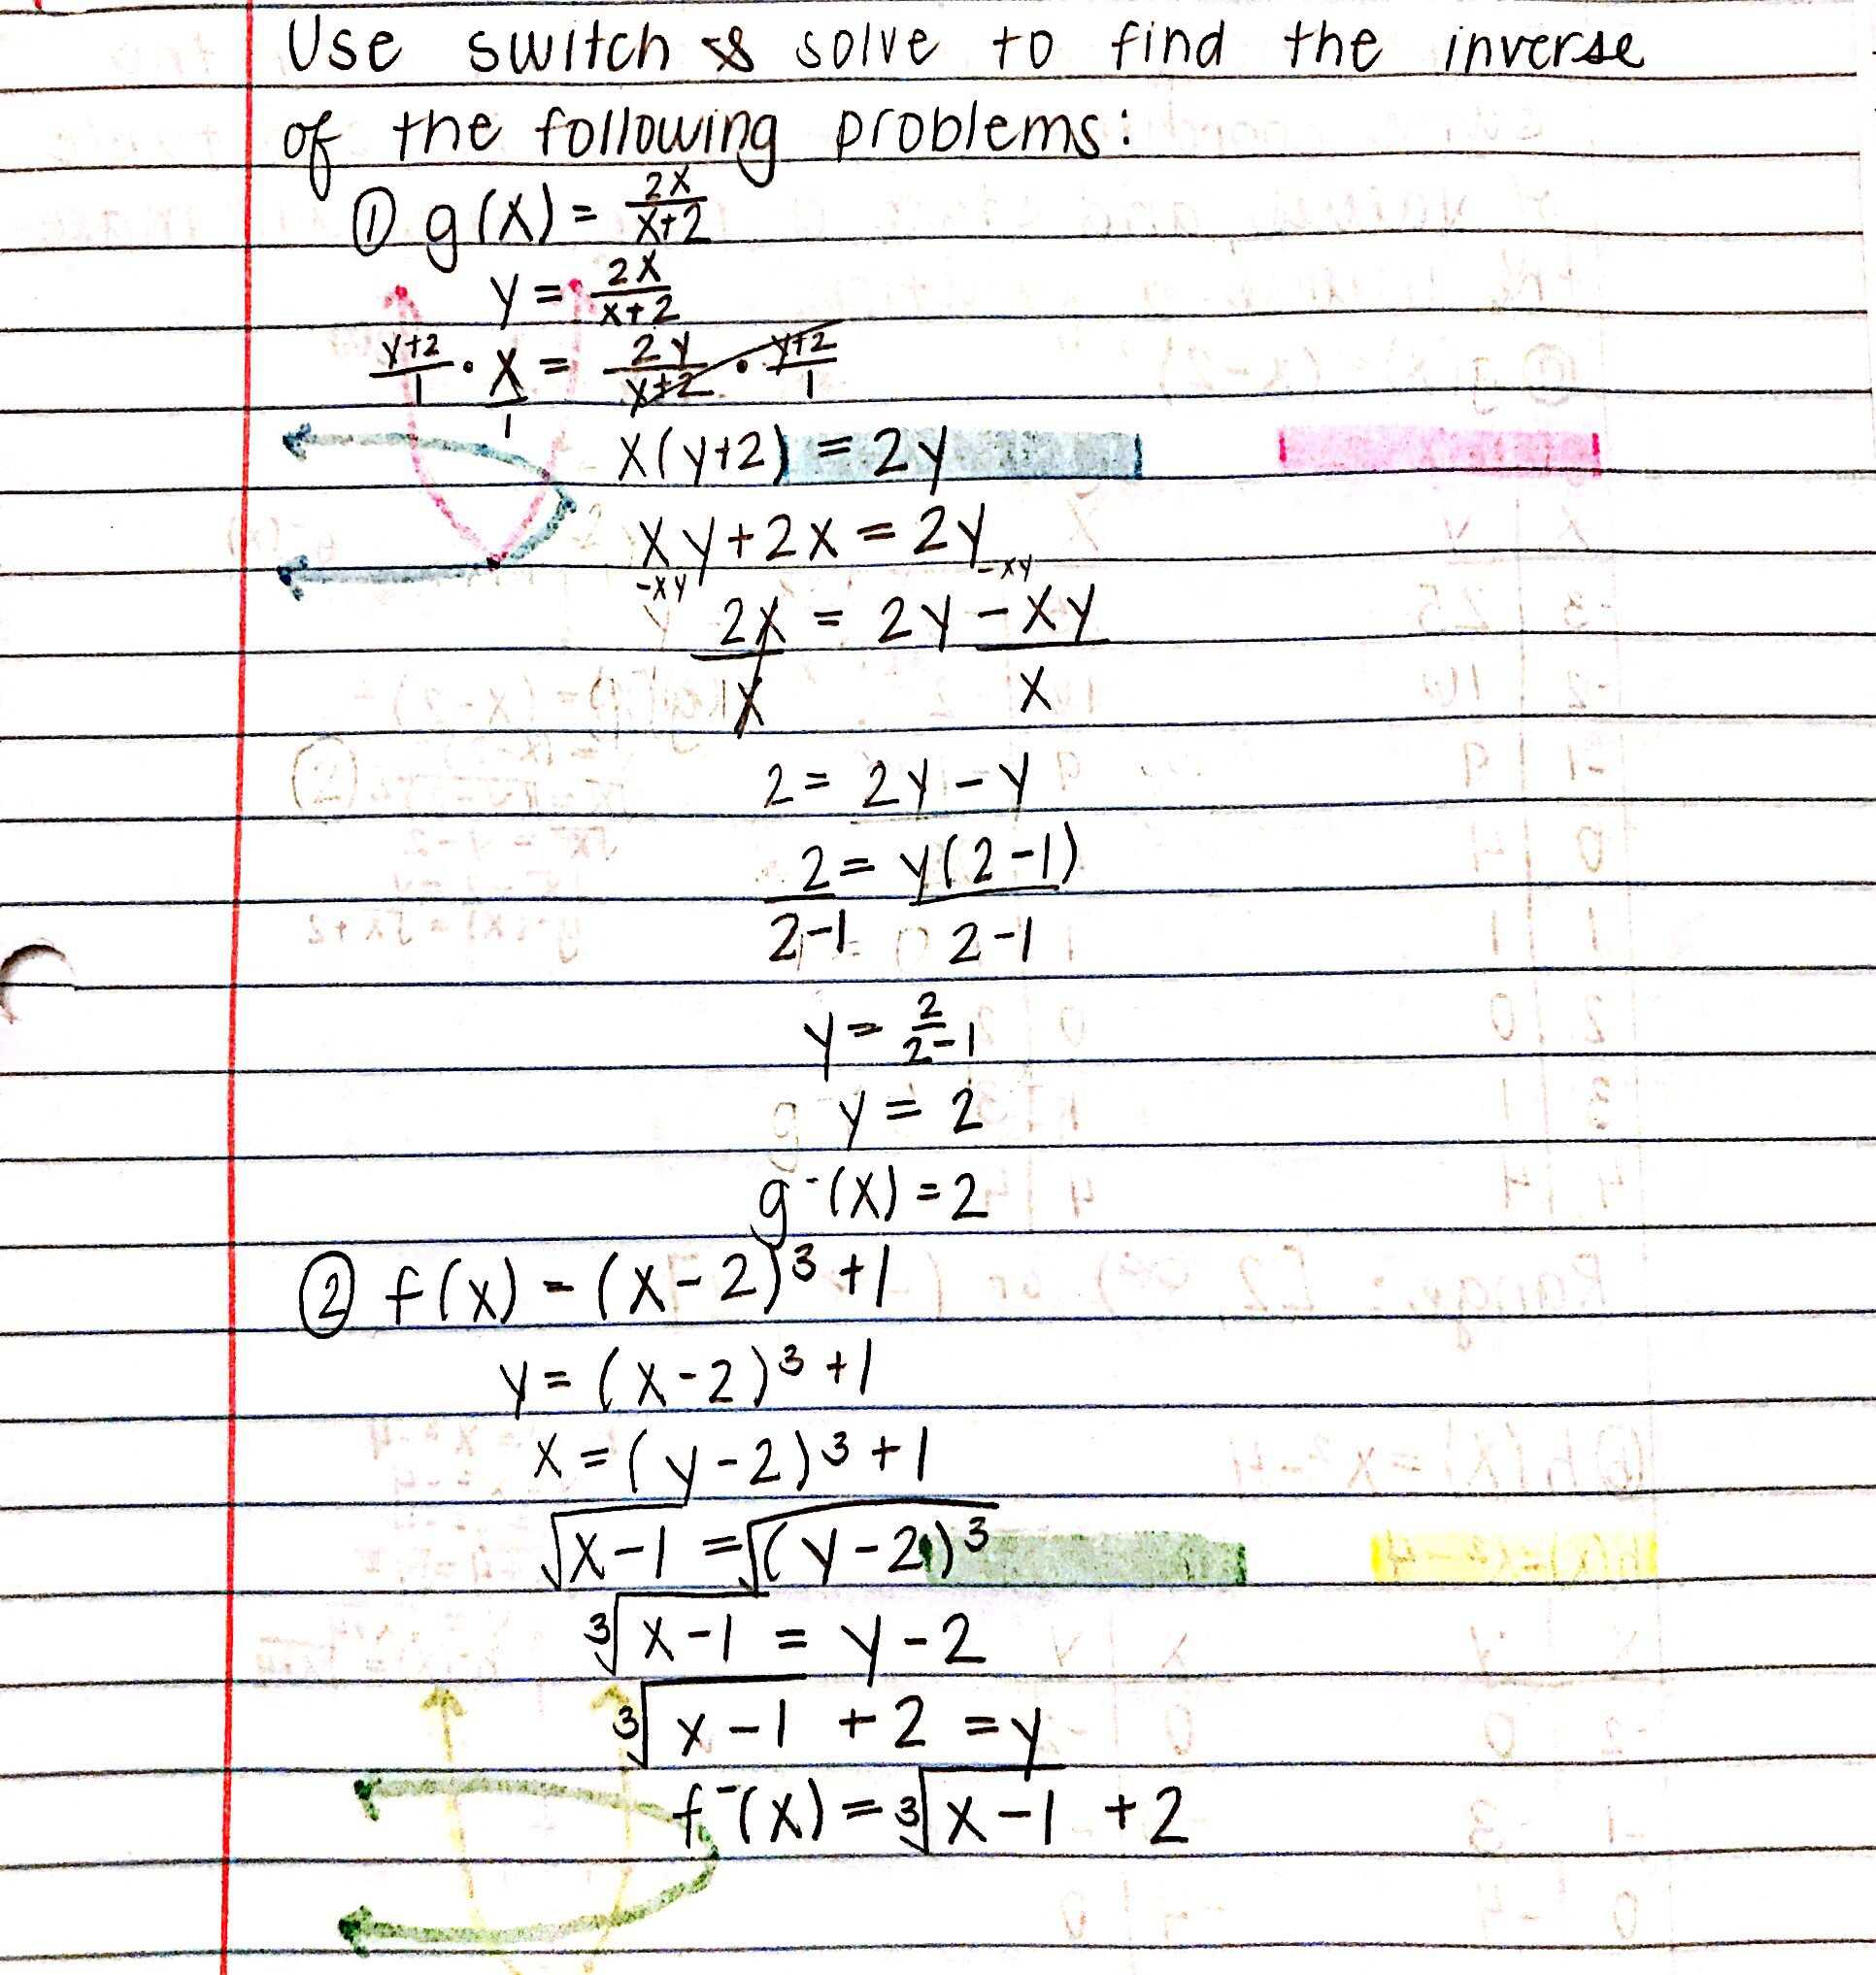 Simple Linear Equations Worksheet as Well as Exponential and Logarithmic Equations Worksheet Inspirational